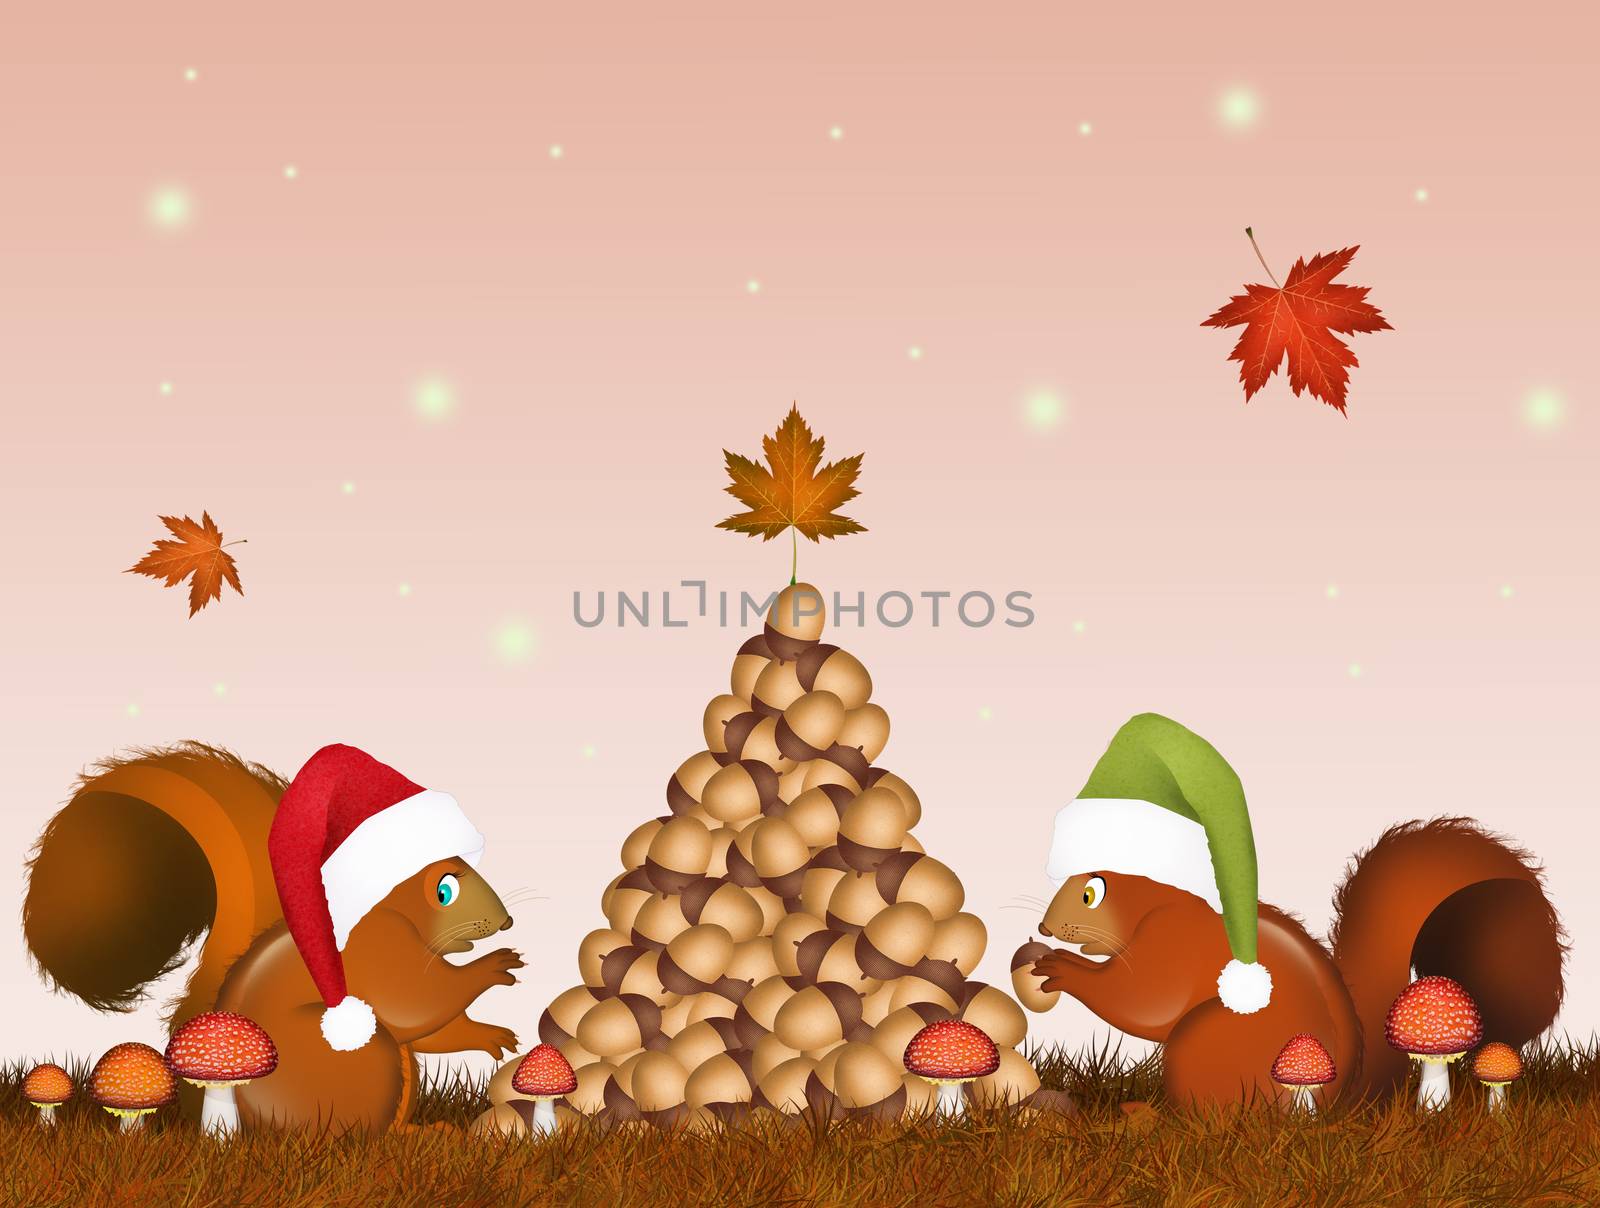 Christmas with Christmas squirrels make tree with acorns by adrenalina